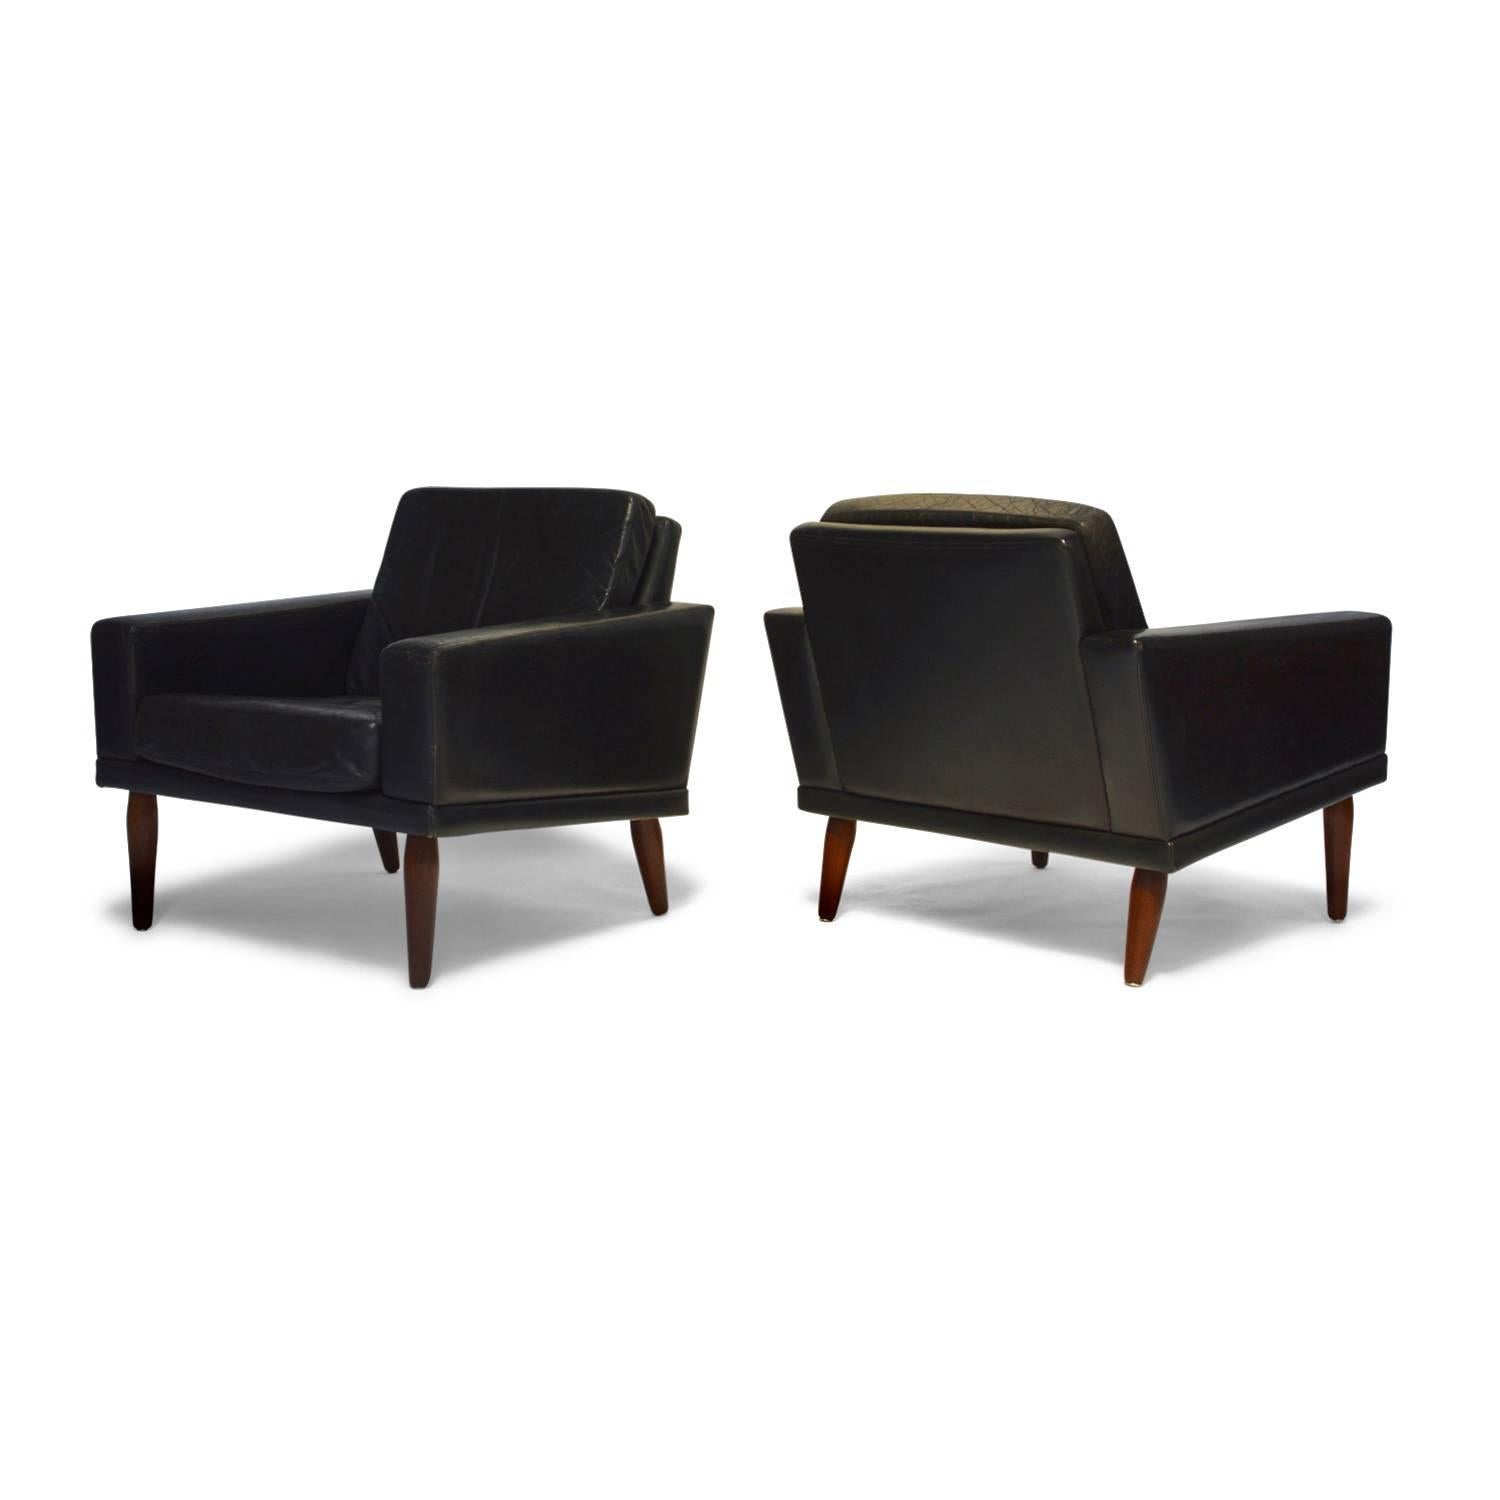 Pair of Bovenkamp lounge chairs in black leather and solid teak legs.
The chairs are branded with the Bovenkamp logo.
Bovenkamp is a Dutch manufacturer that worked mostly with Scandinavian designers like Aksel Bender Madsen.
Also available with